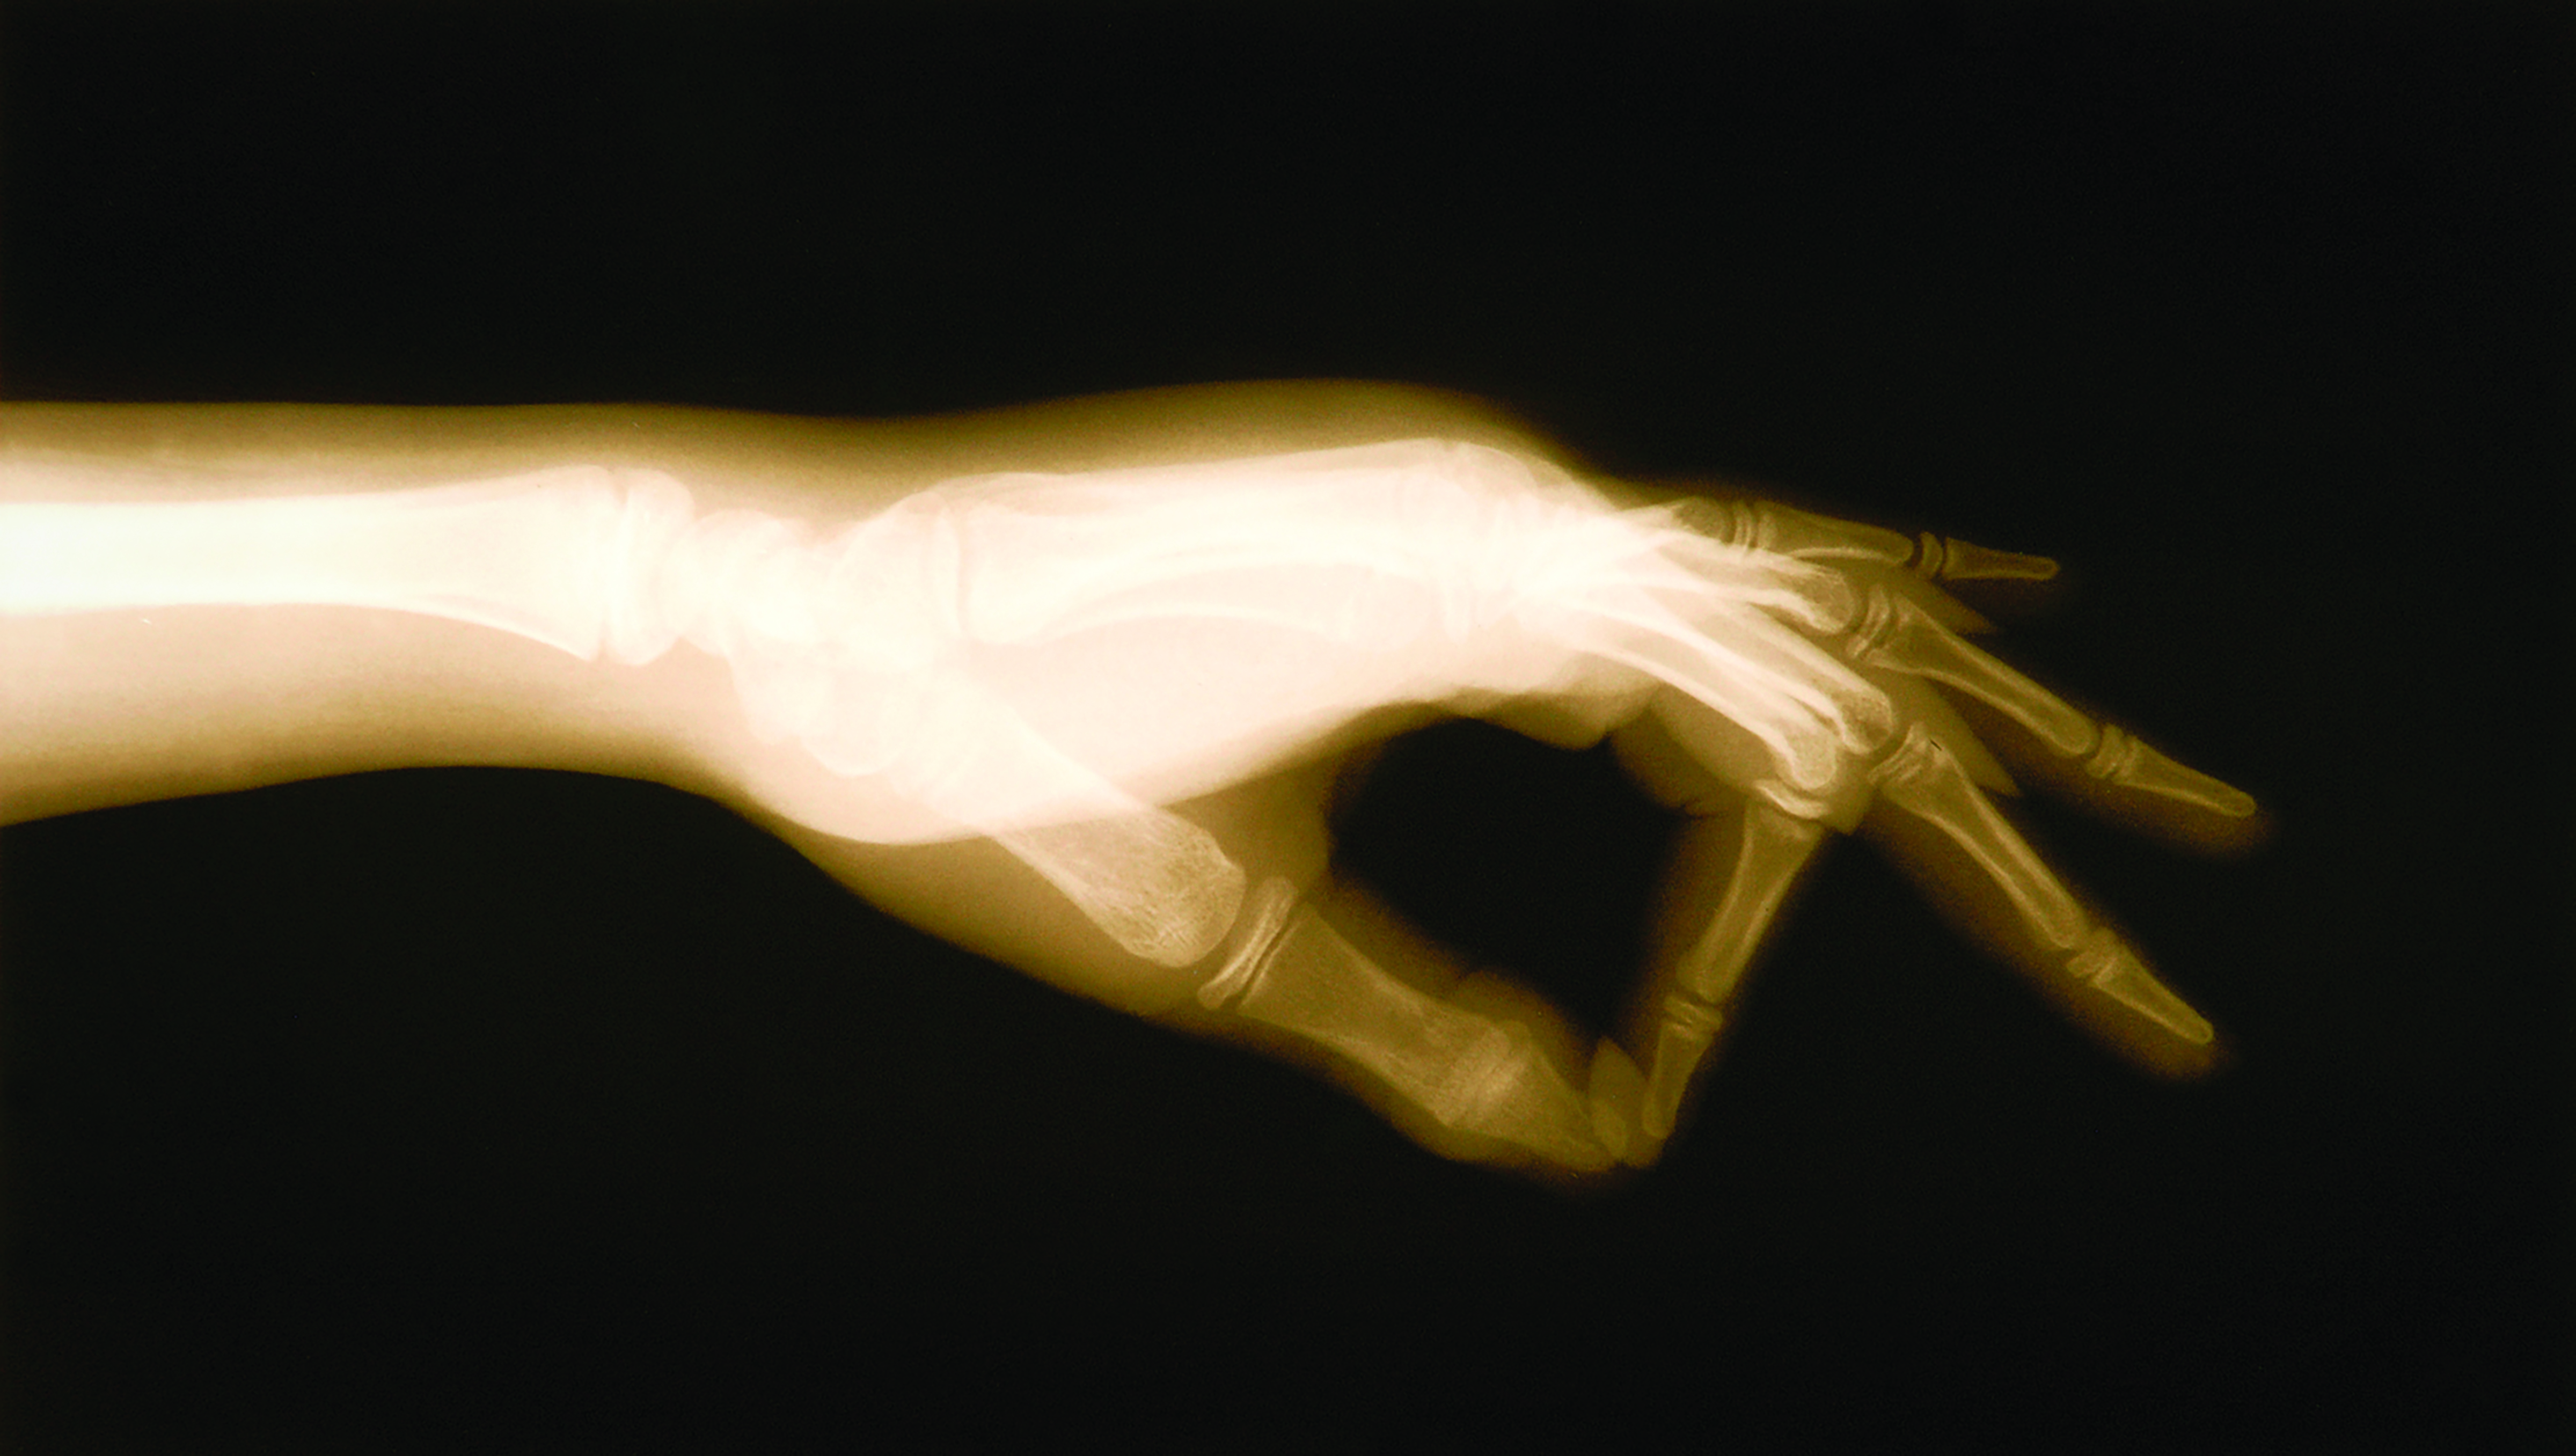 A X-ray of hand, sepia-toned